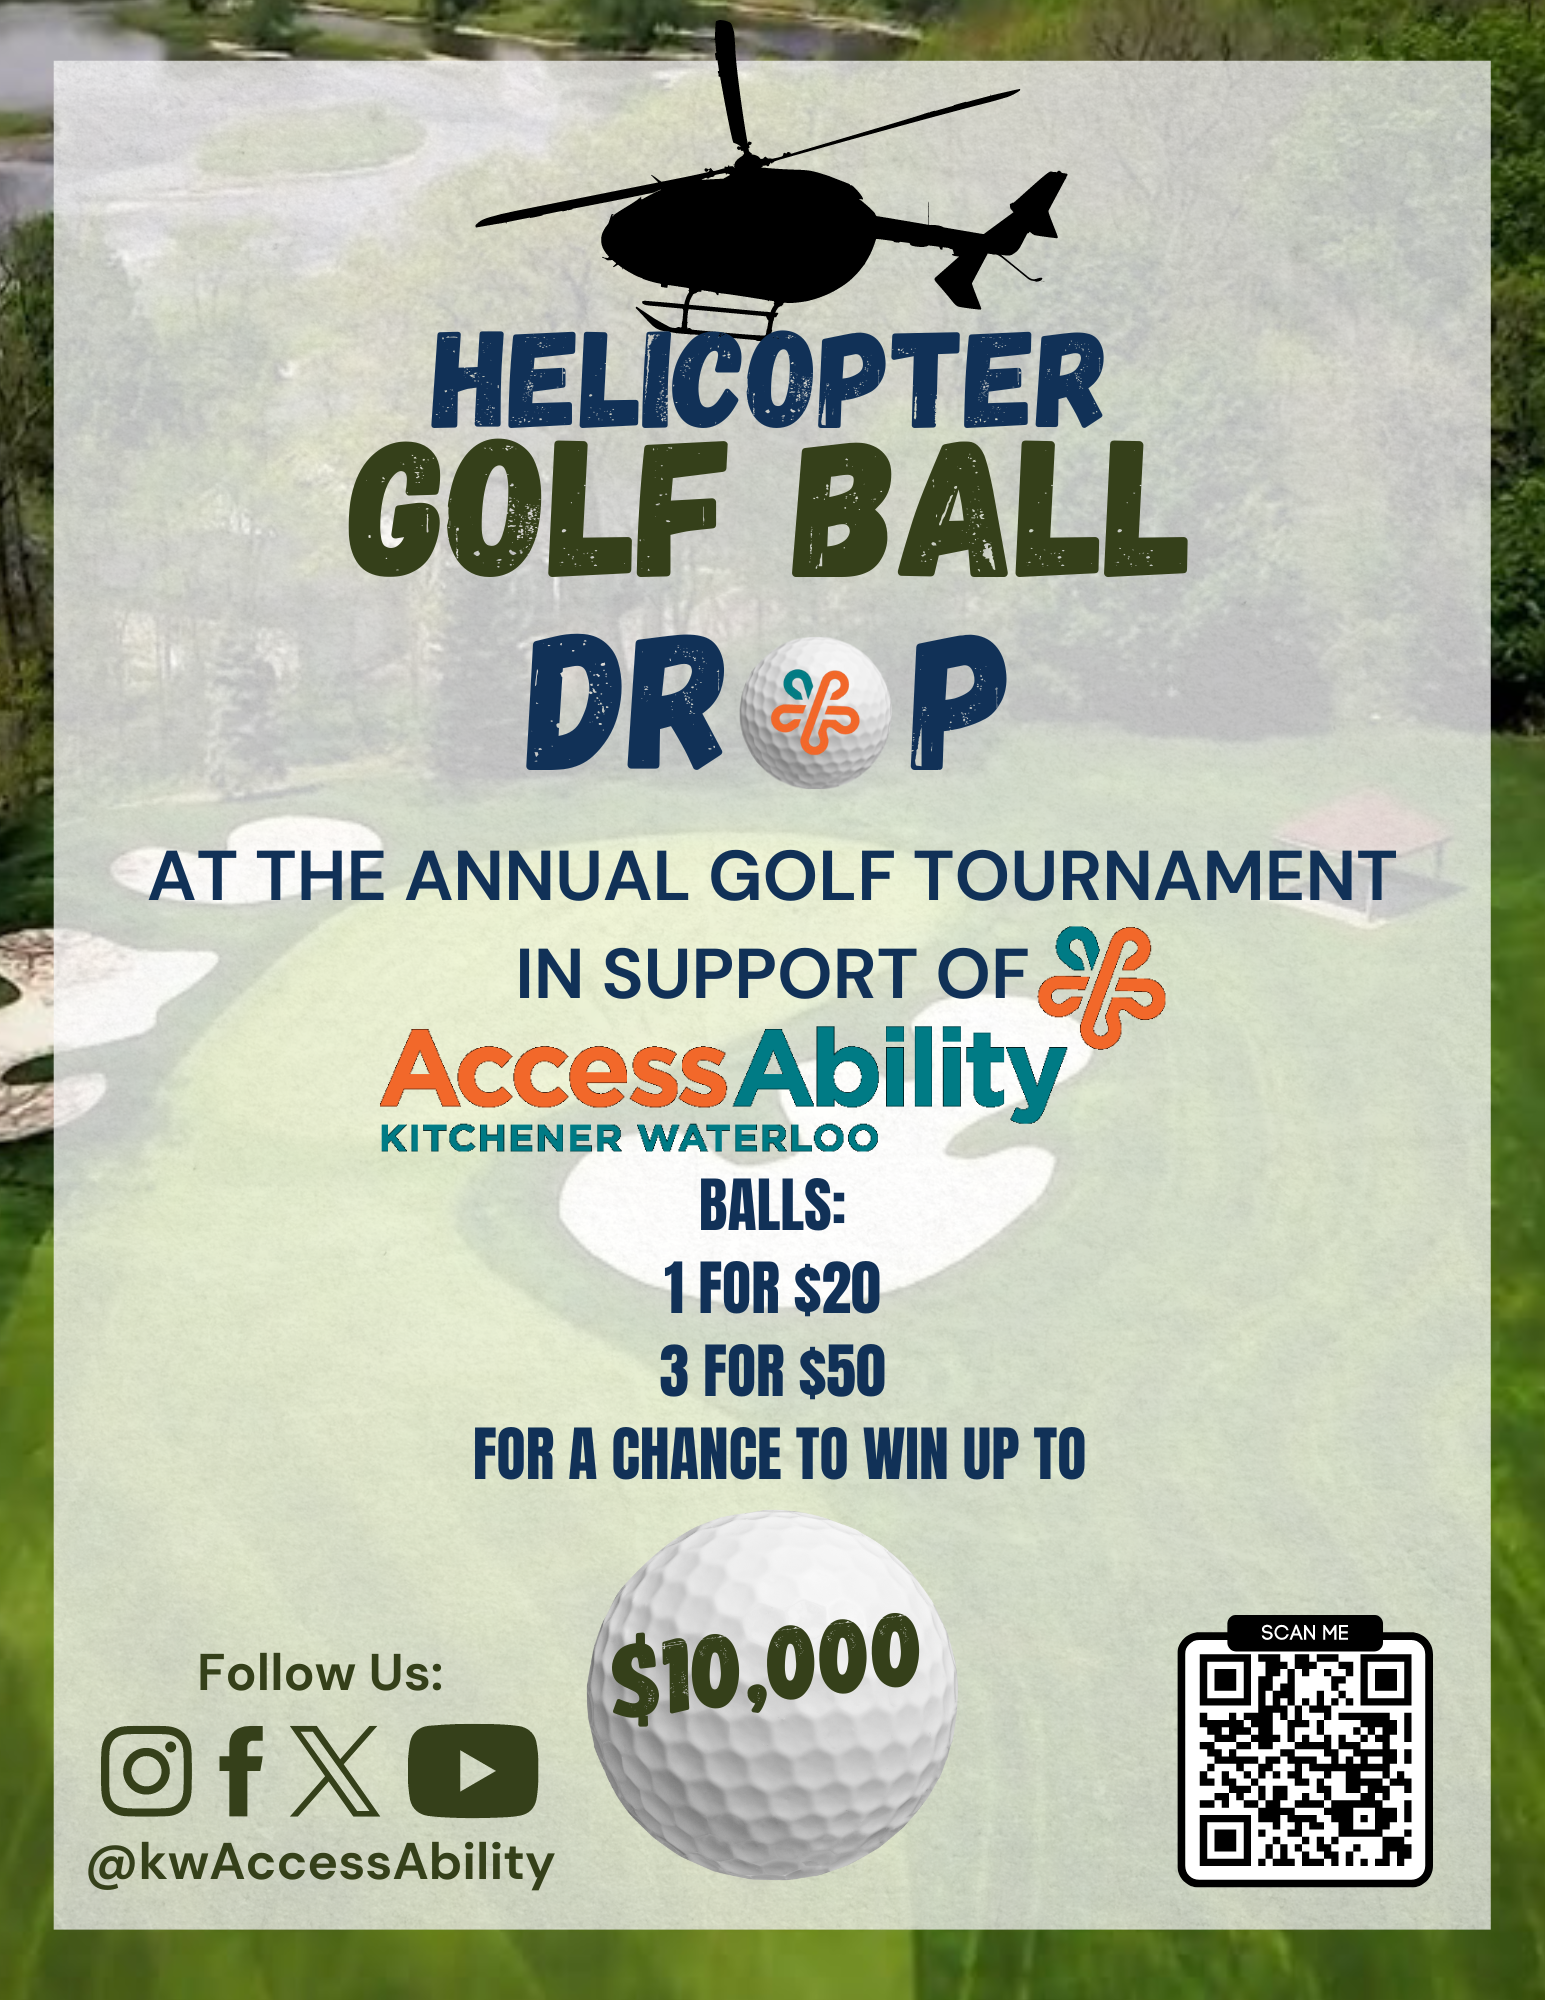 Image of a Helicopter at top with the text below "Helicopter Golf Ball Drop at the Annual Golf Tournament in support of KW AccessAbility $20 per ball for a chance to win up to $10,000